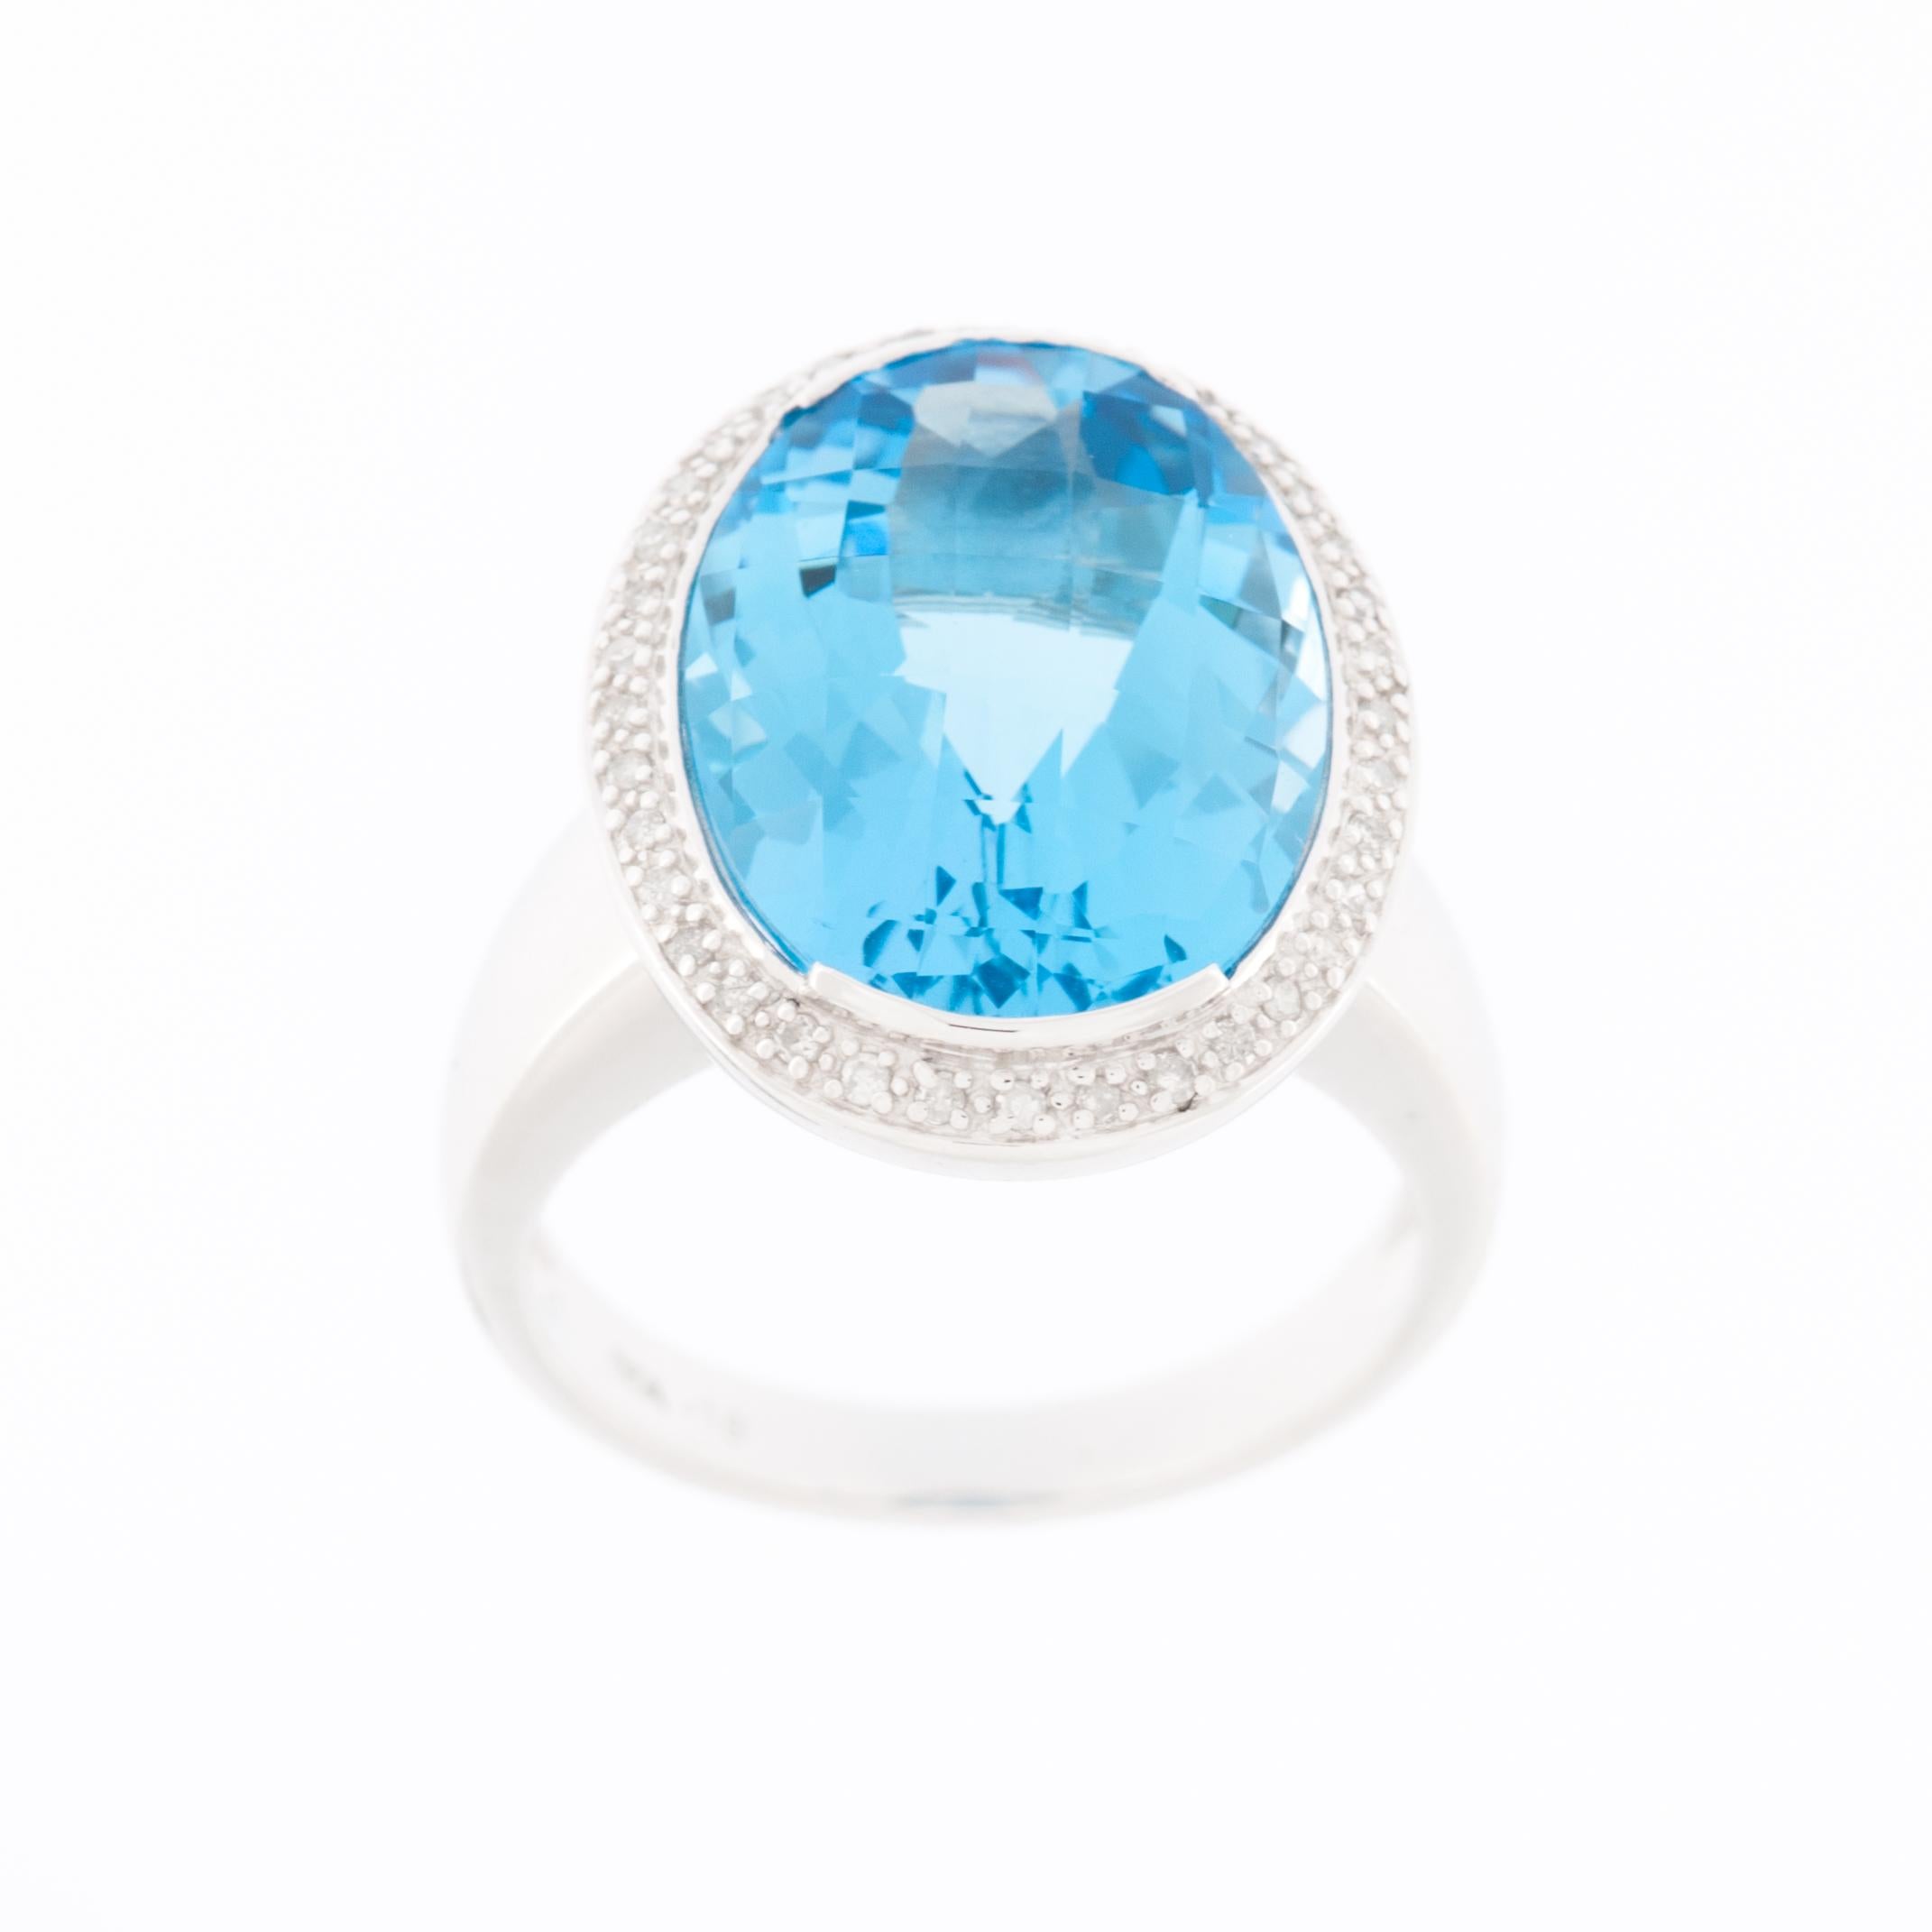 The Contemporary 9kt White Gold Ring with Blue Quartz and Diamonds is a stunning piece of jewelry that combines modern design elements with precious gemstones. Here is a detailed description of the ring:

Metal: The ring is crafted from 9-karat